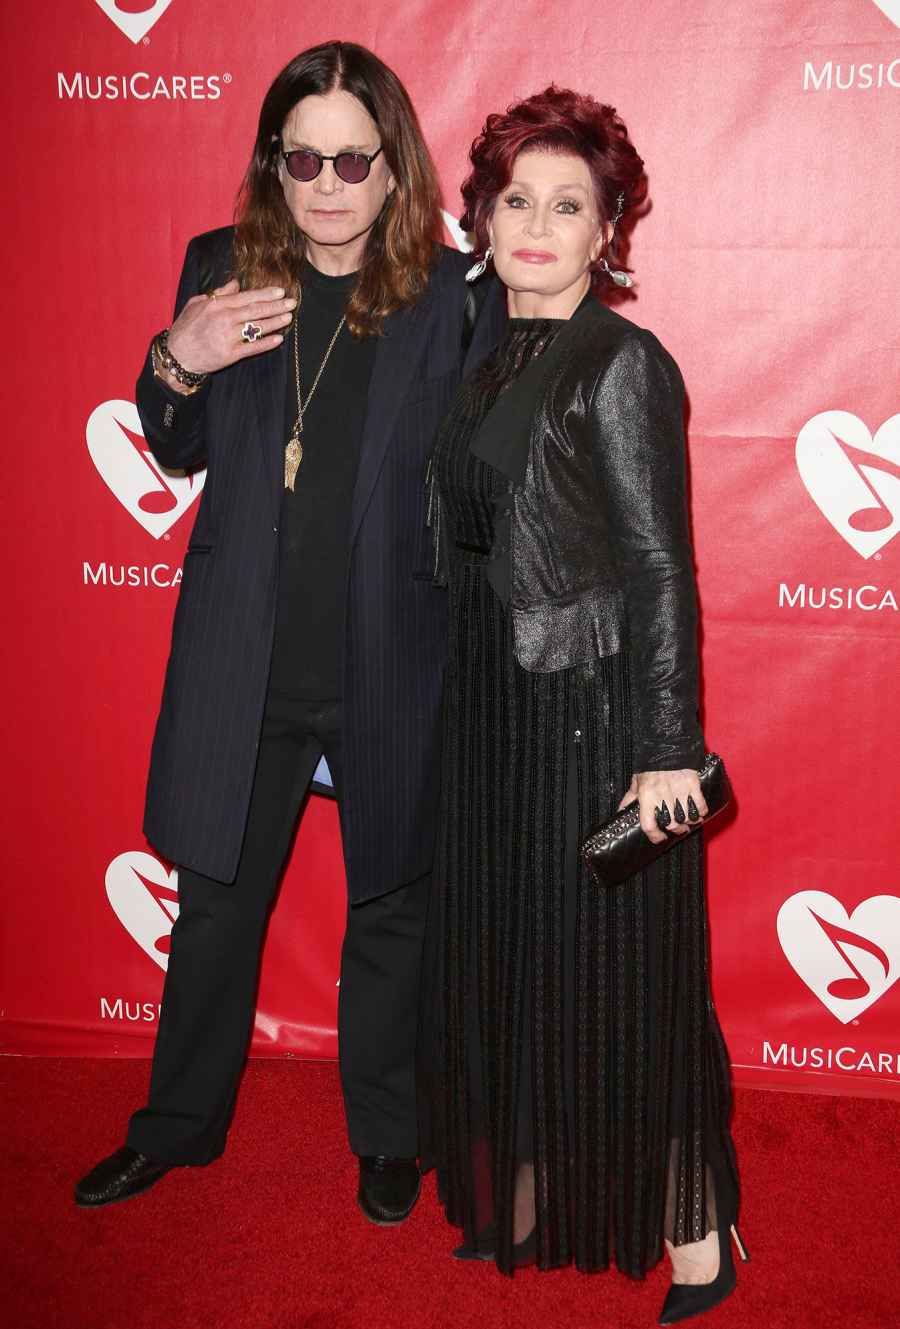 They Talk About His Cheating Ozzy and Sharon Osbourne A Timeline of Their Relationship